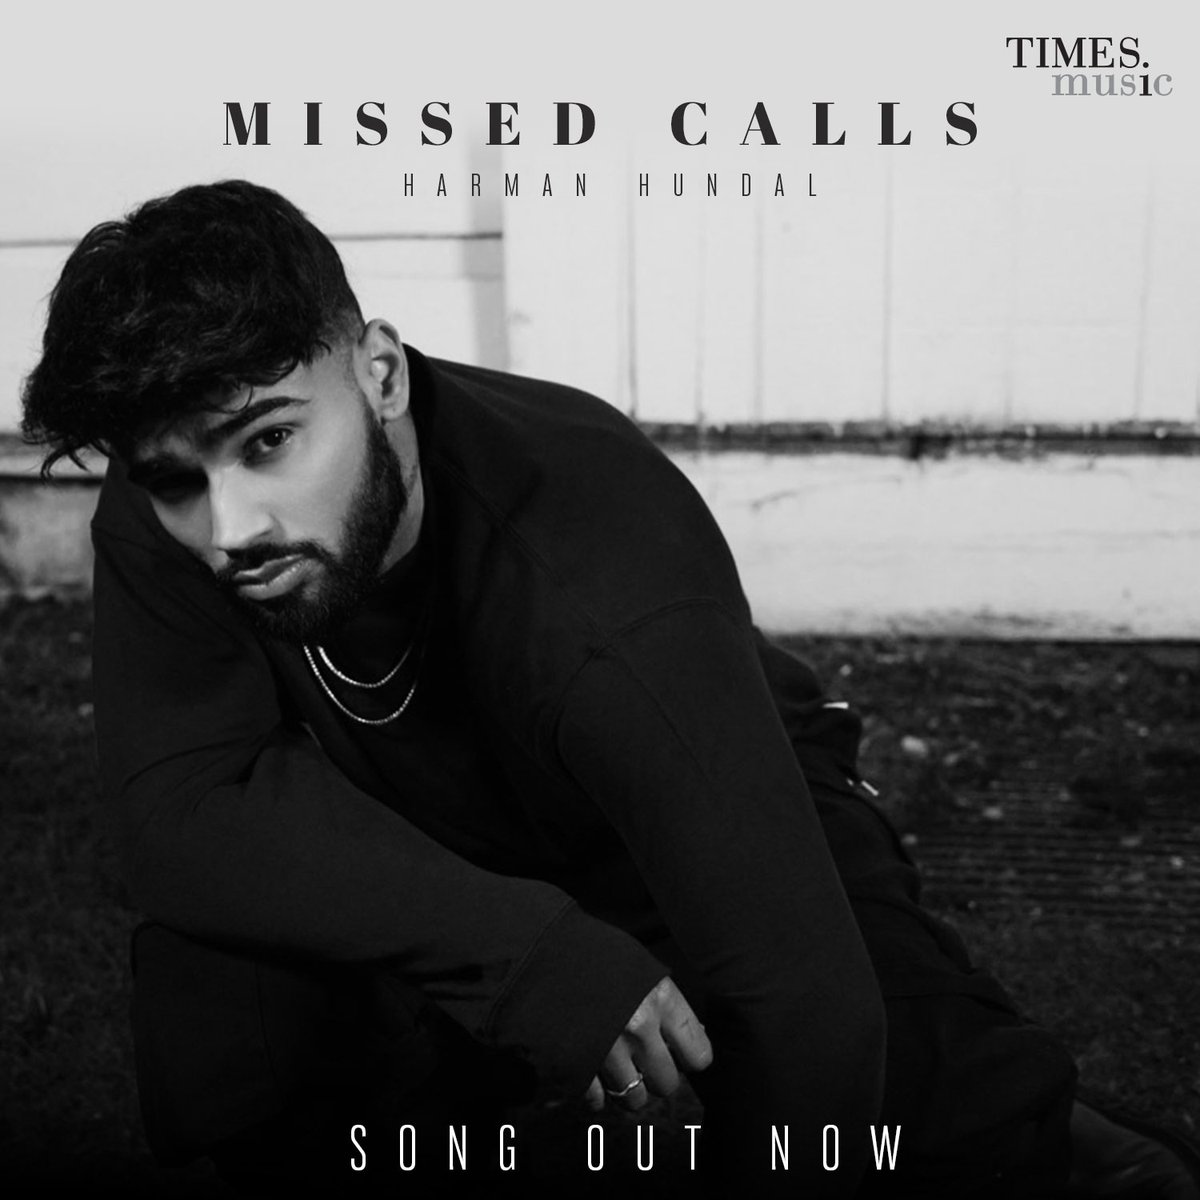 Harman's latest video of 'Missed Calls'📲 is so lit 🔥🔥 that you can't miss it!✨🎤😍 Check out the full video right now only on Times Music! 📸 youtube.com/watch?v=eMVe1X…